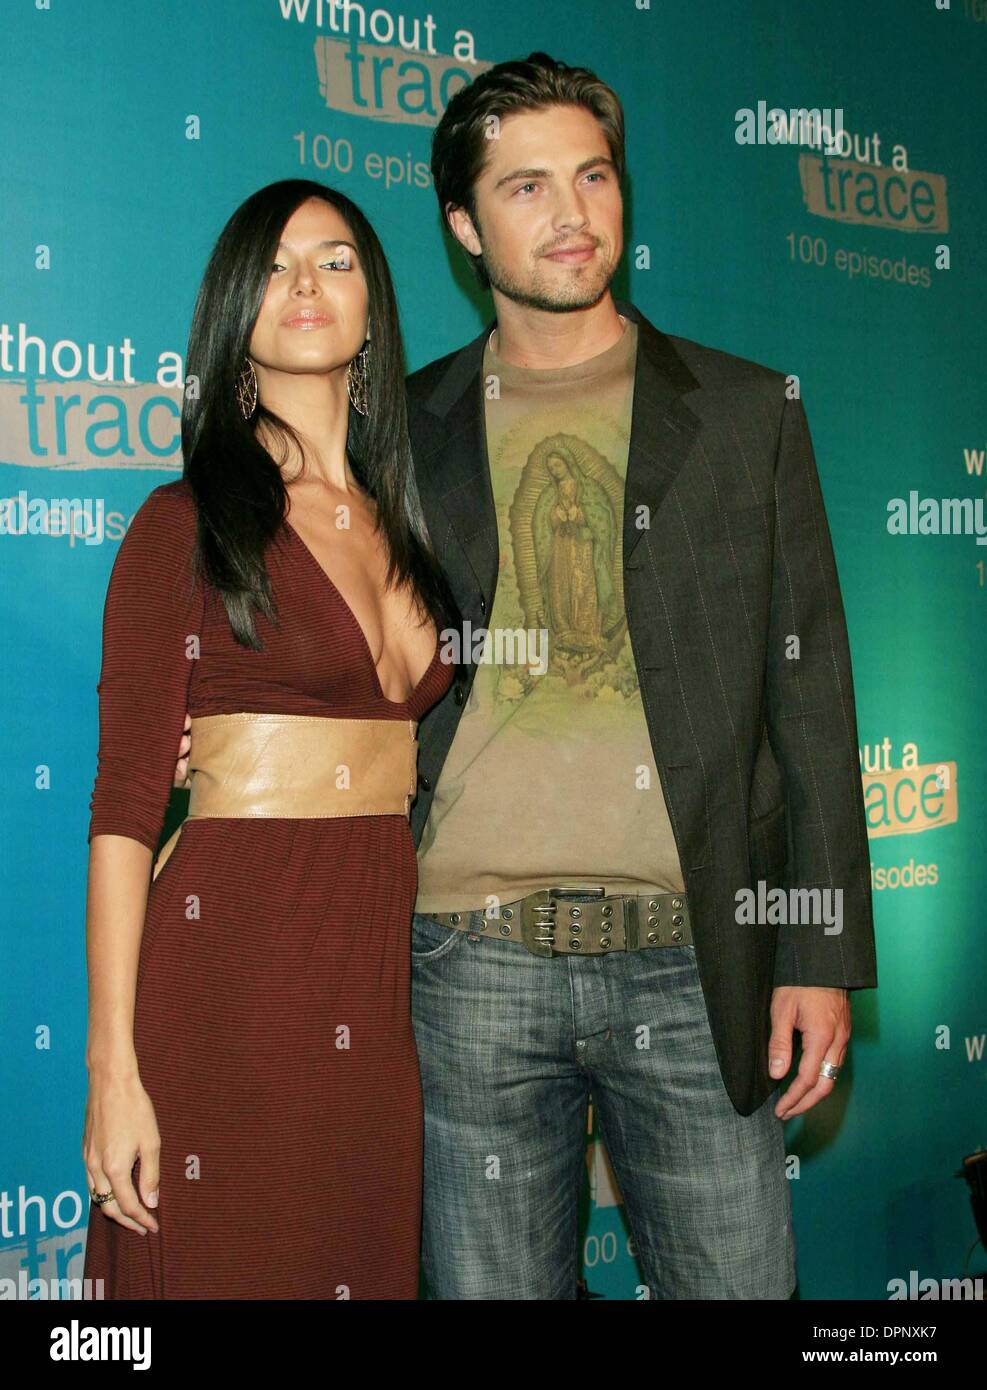 Sept. 9, 2006 - Hollywood, CALIFORNIA, USA - ROSELYN SANCHEZ AND ERIC WINTER -.WITHOUT A TRACE 100TH EPISODE PARTY -.CABANA CLUB, HOLLYWOOD, CALIFORNIA - .09-09-2006 -. NINA PROMMER/   2006.K49298NP(Credit Image: © Globe Photos/ZUMAPRESS.com) Stock Photo